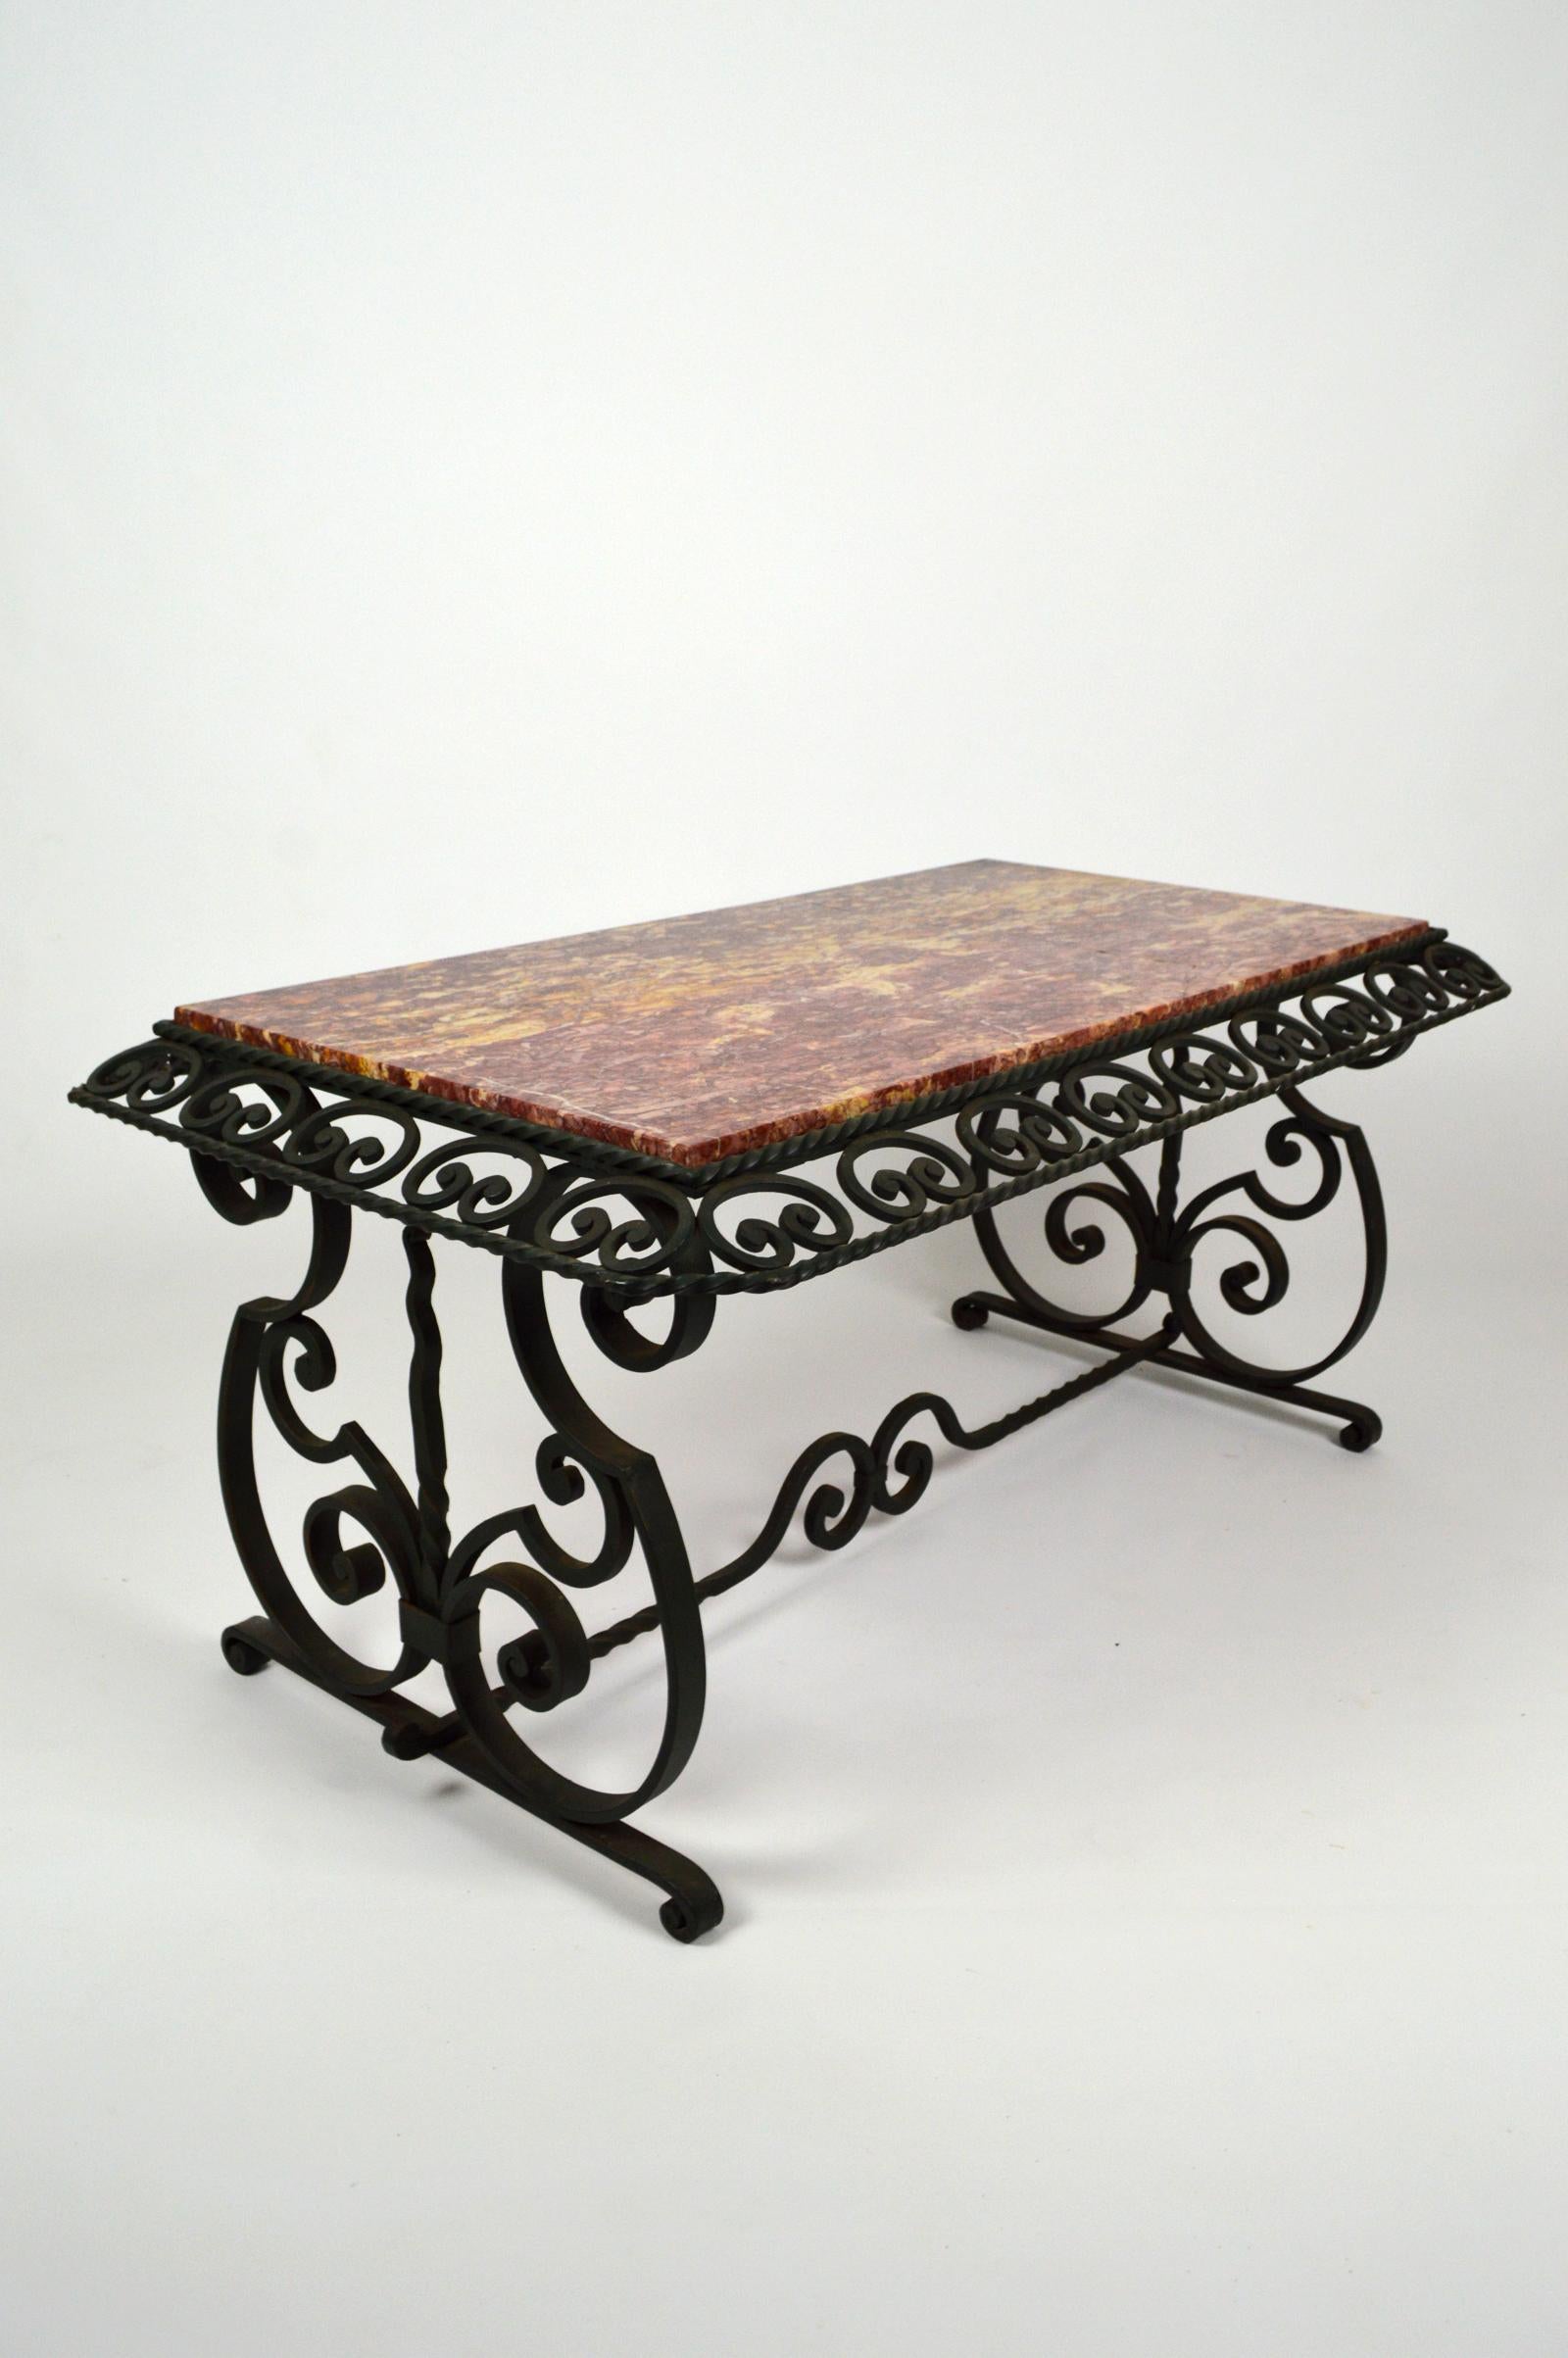 Elegant wrought iron coffee / side table with pink marble top.
The wrought iron structure is painted dark green.
Beautiful ironwork.

Art Deco, France, circa 1940.
Unsigned. In the style of the productions, at the same period, of Gilbert